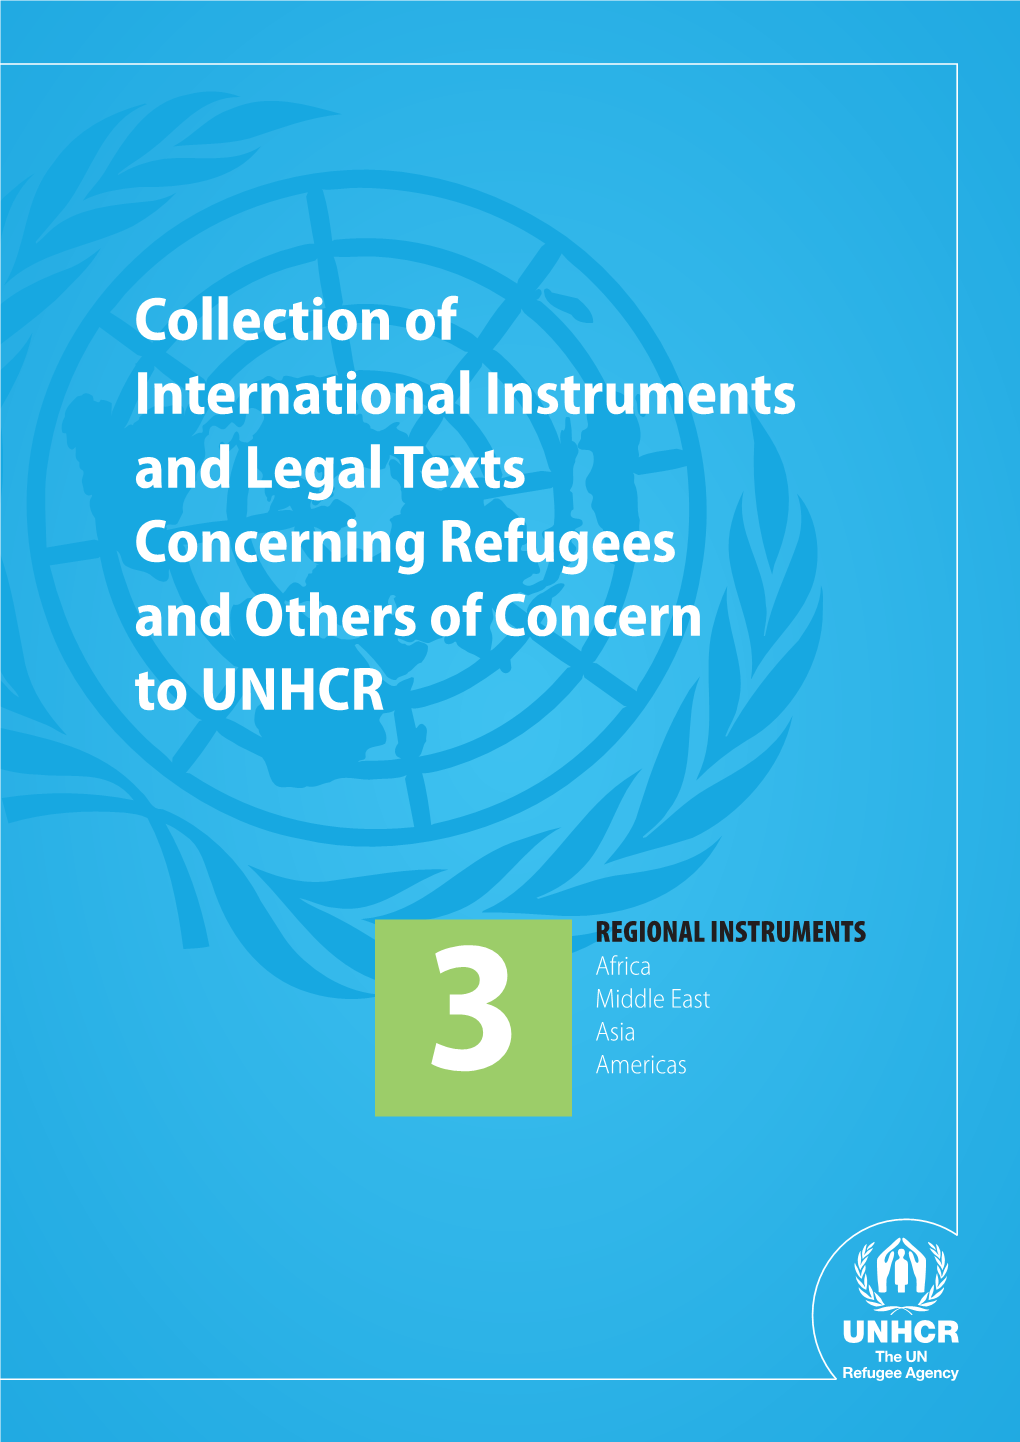 Collection of International Instruments and Legal Texts Concerning Refugees and Others of Concern to UNHCR